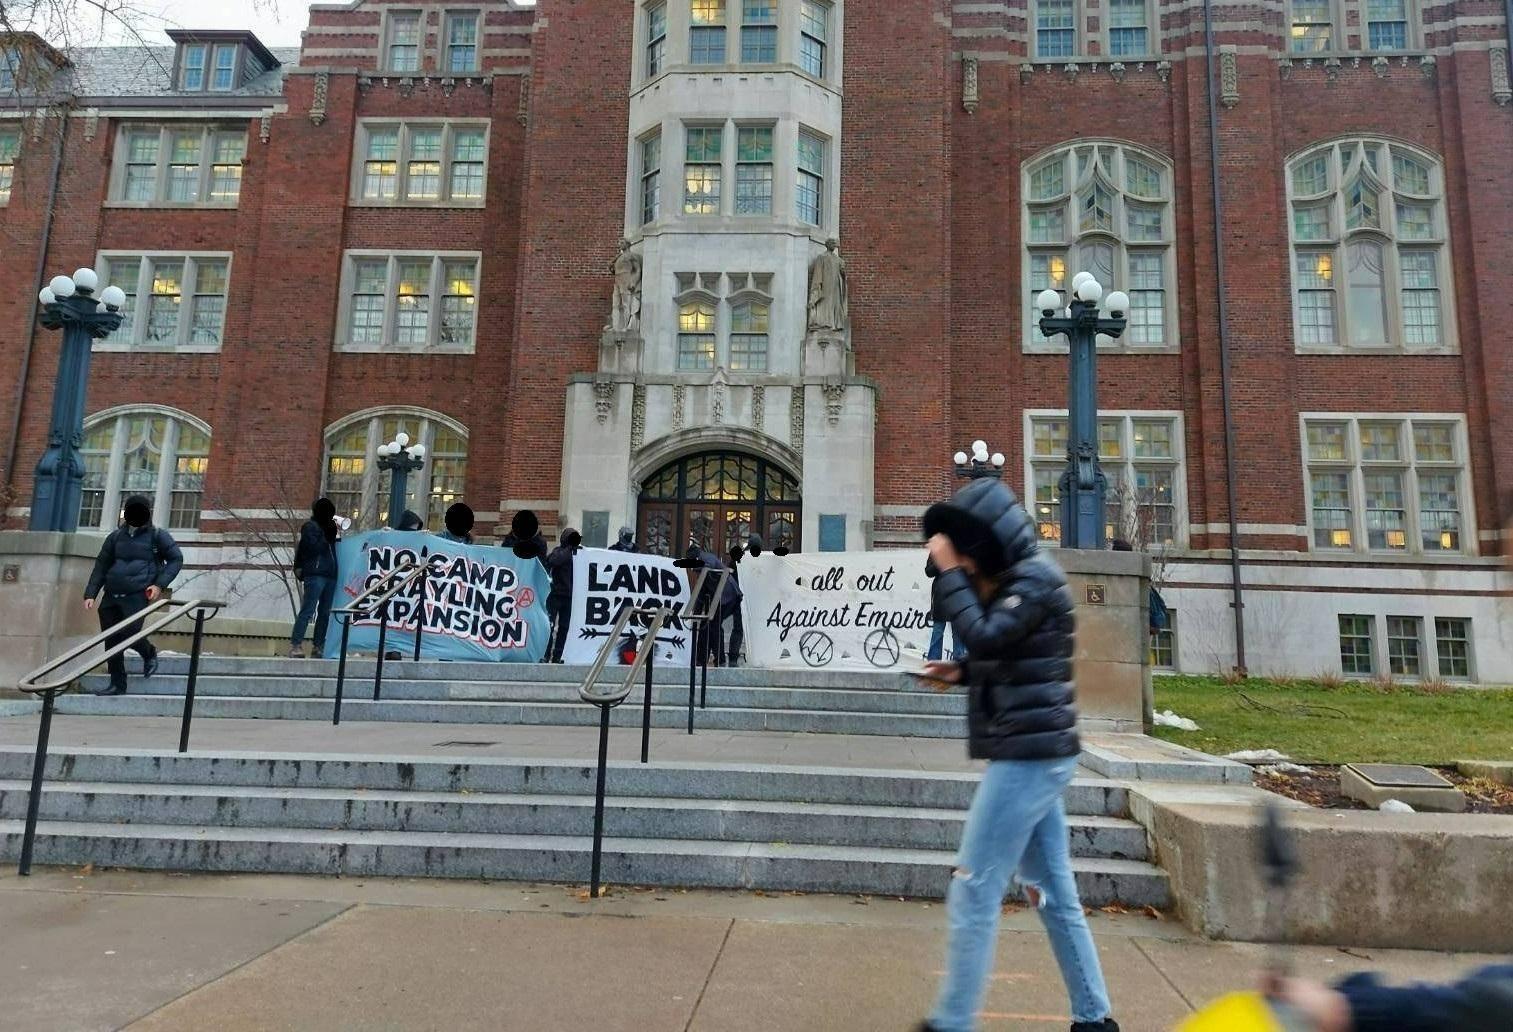 Rally-goers hold banners reading "No Camp Grayling Expansion", "Land Back", and "All Out Against Empire" in front of the Michigan Union building